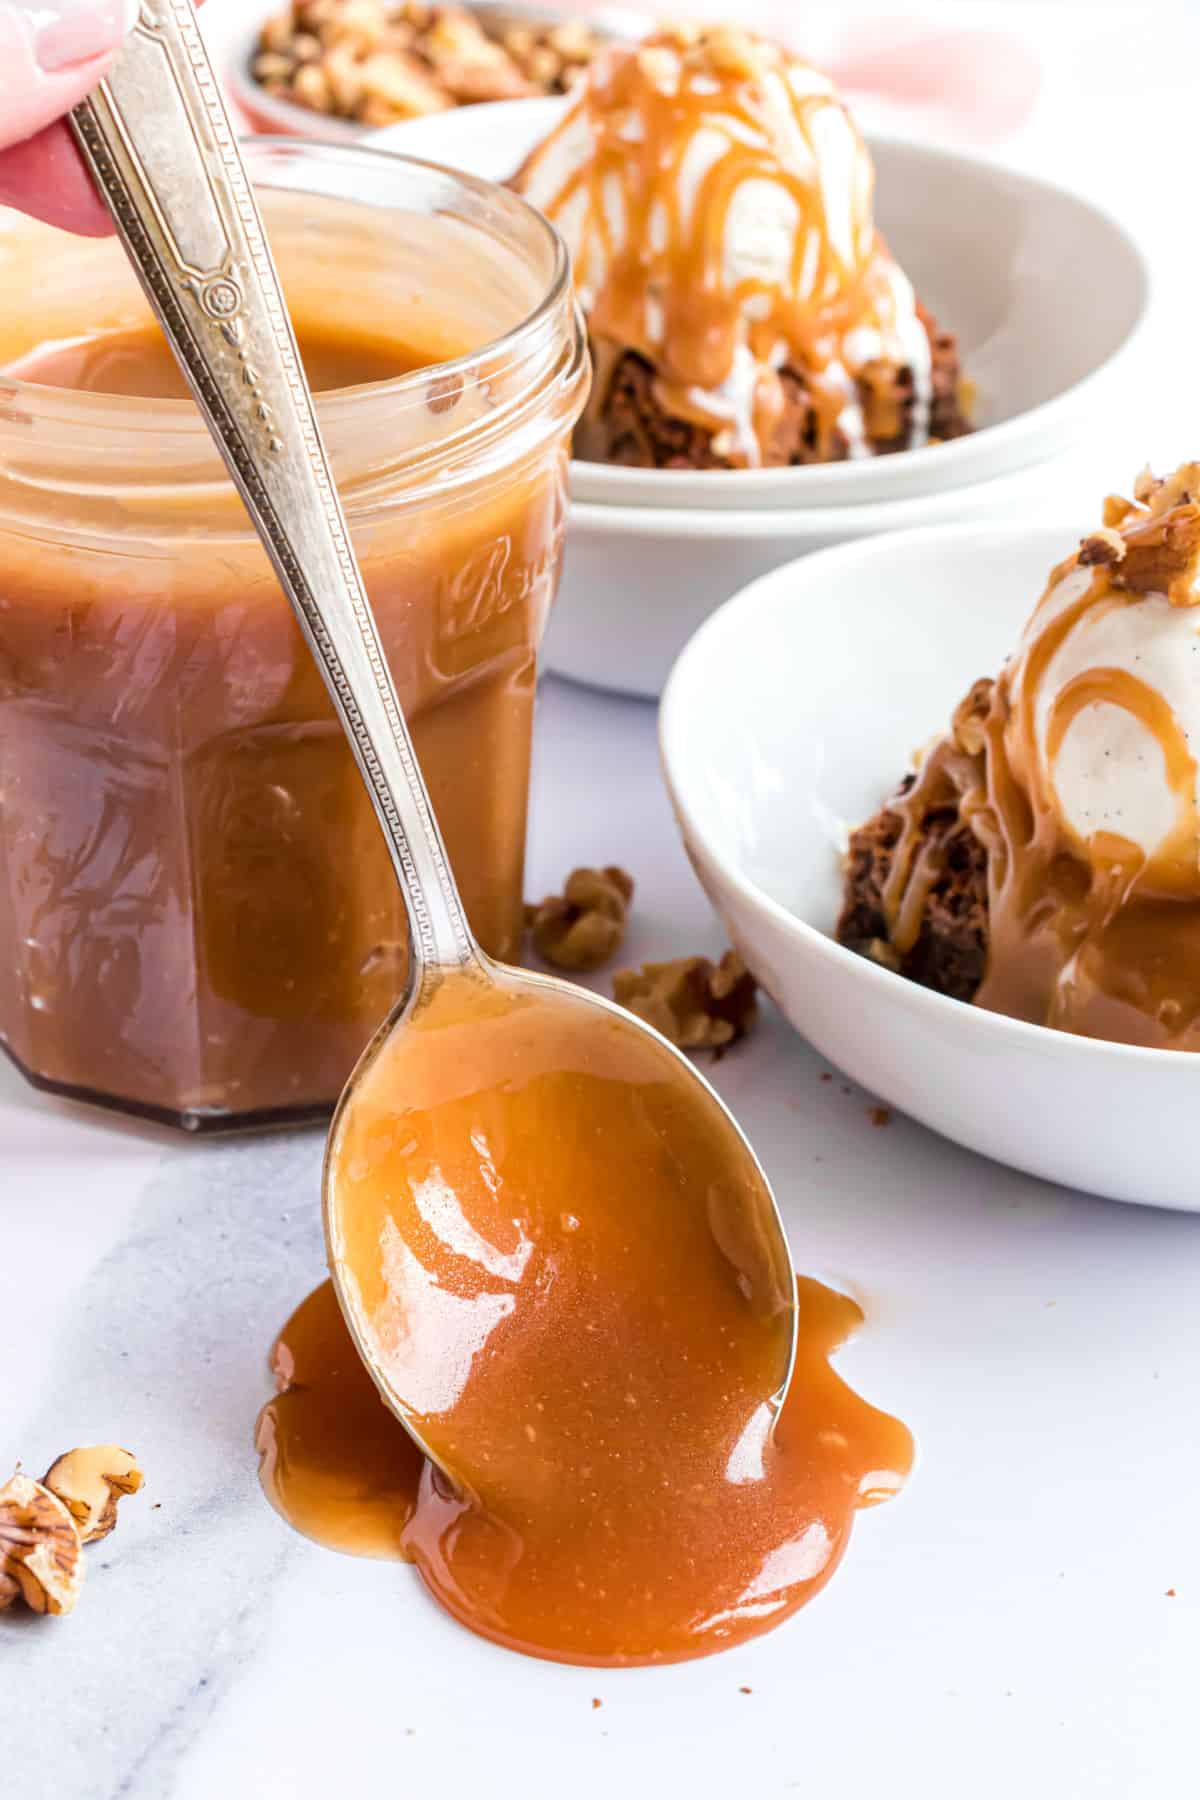 Spoon dripping with caramel sauce.